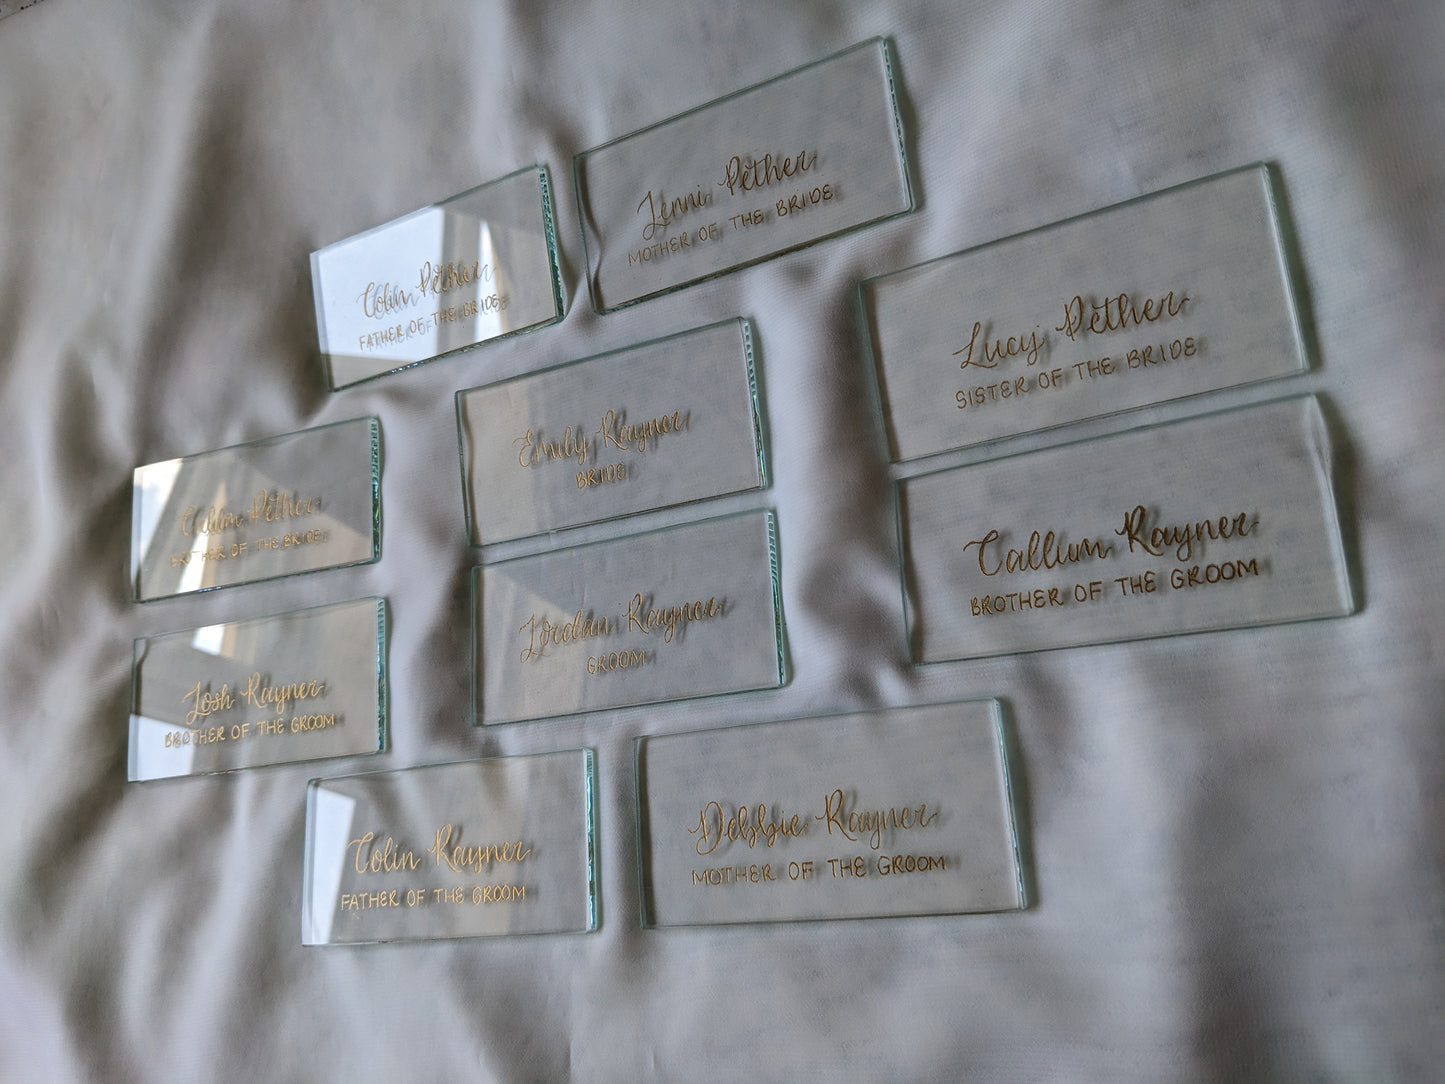 Engraved glass place names